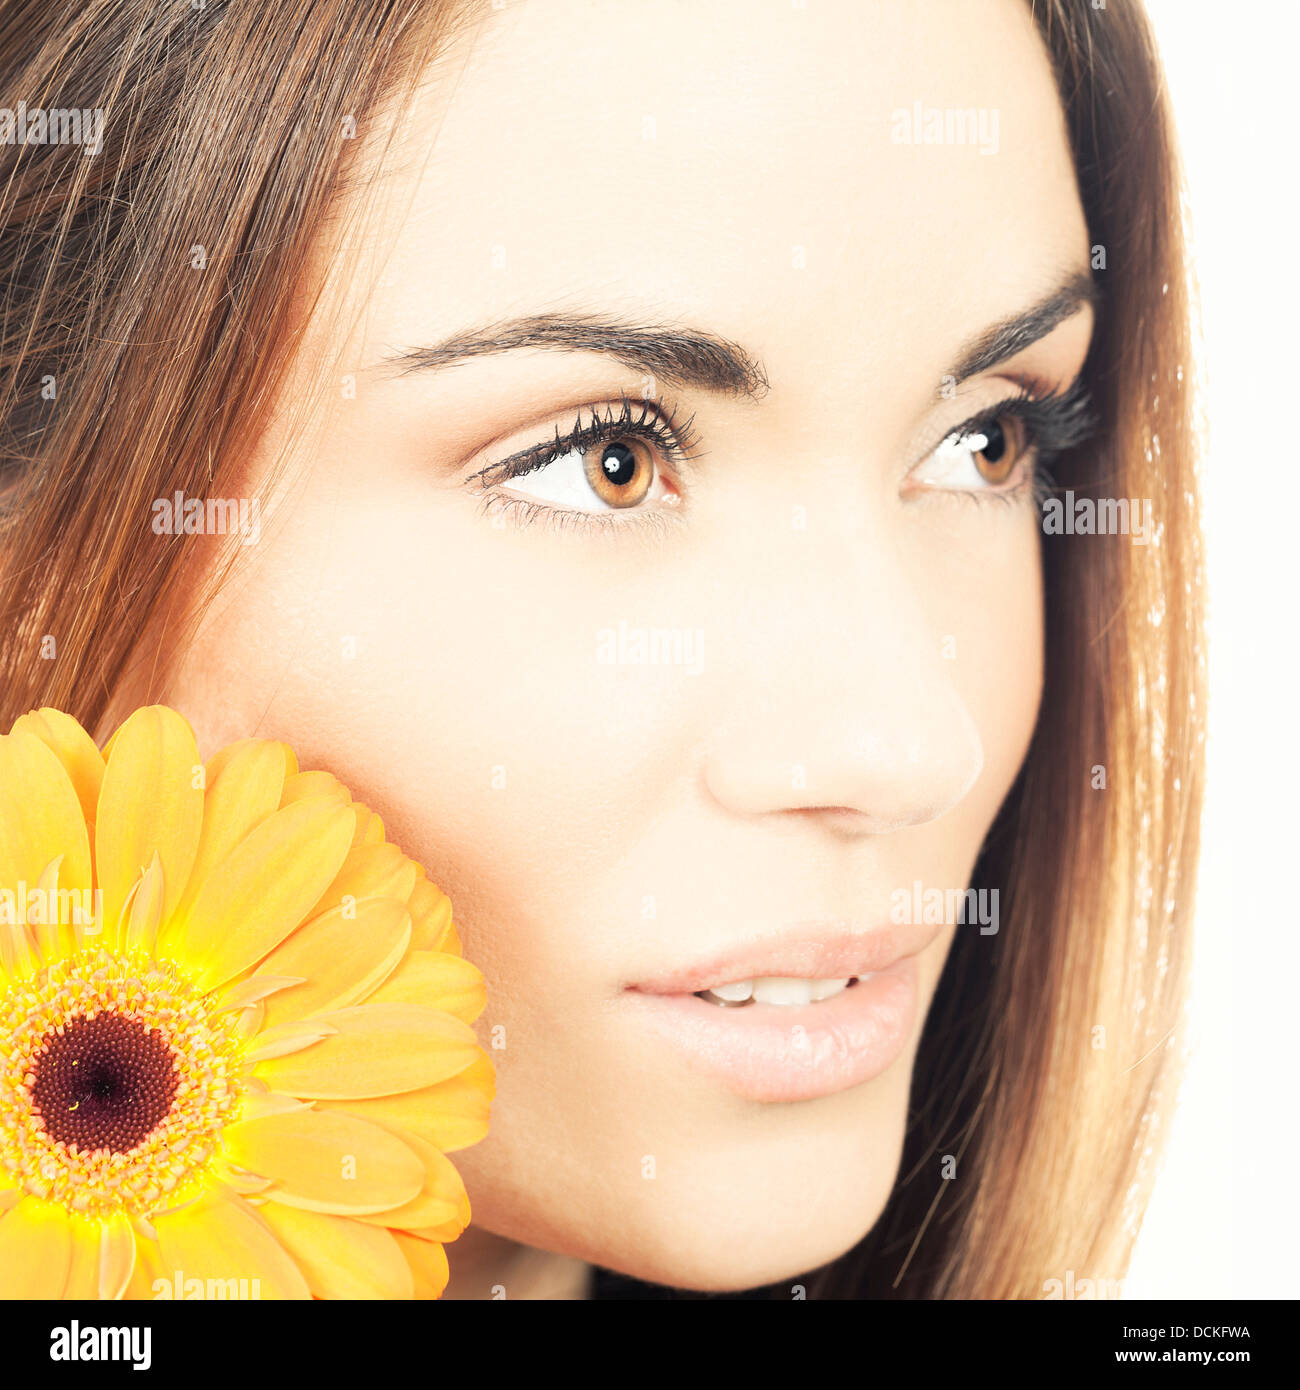 Cute smiling woman portrait with flower Stock Photo